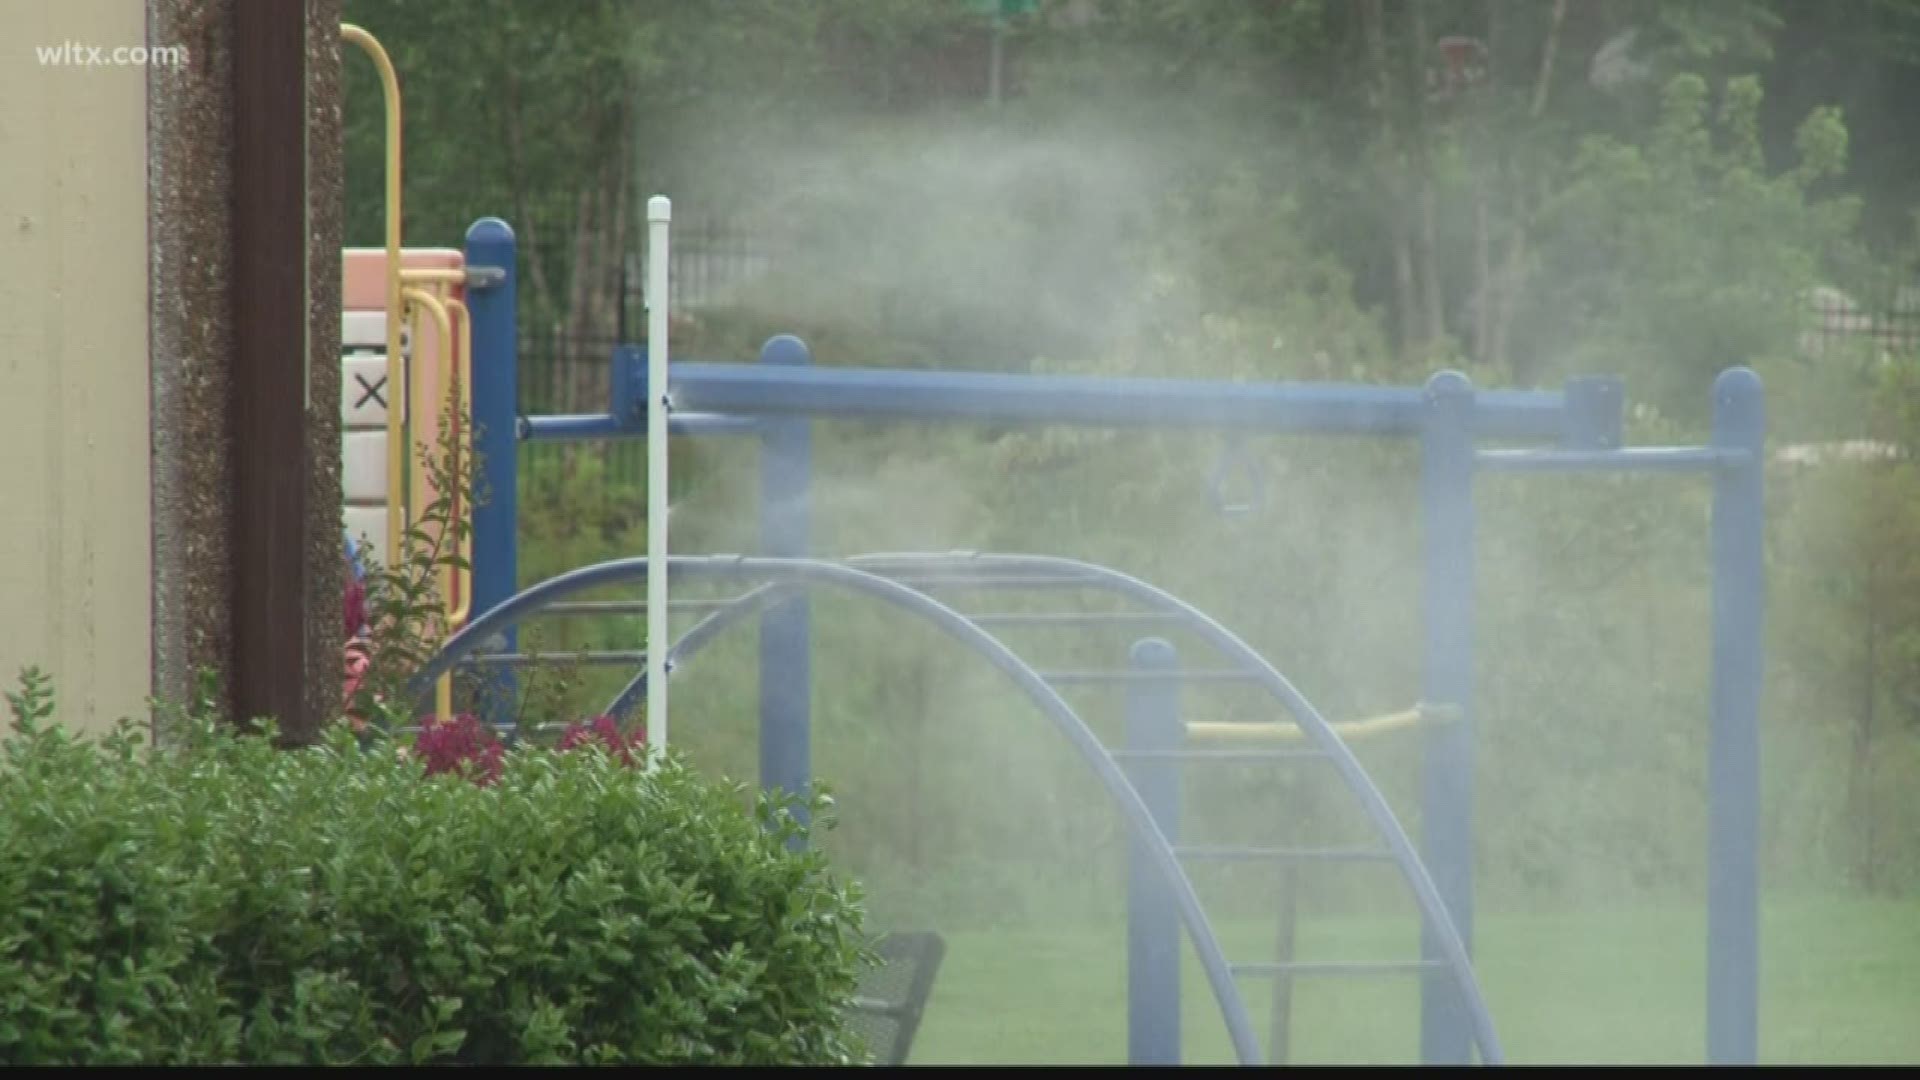 City of Columbia is putting misting stations in area parks to help folks keep cool.